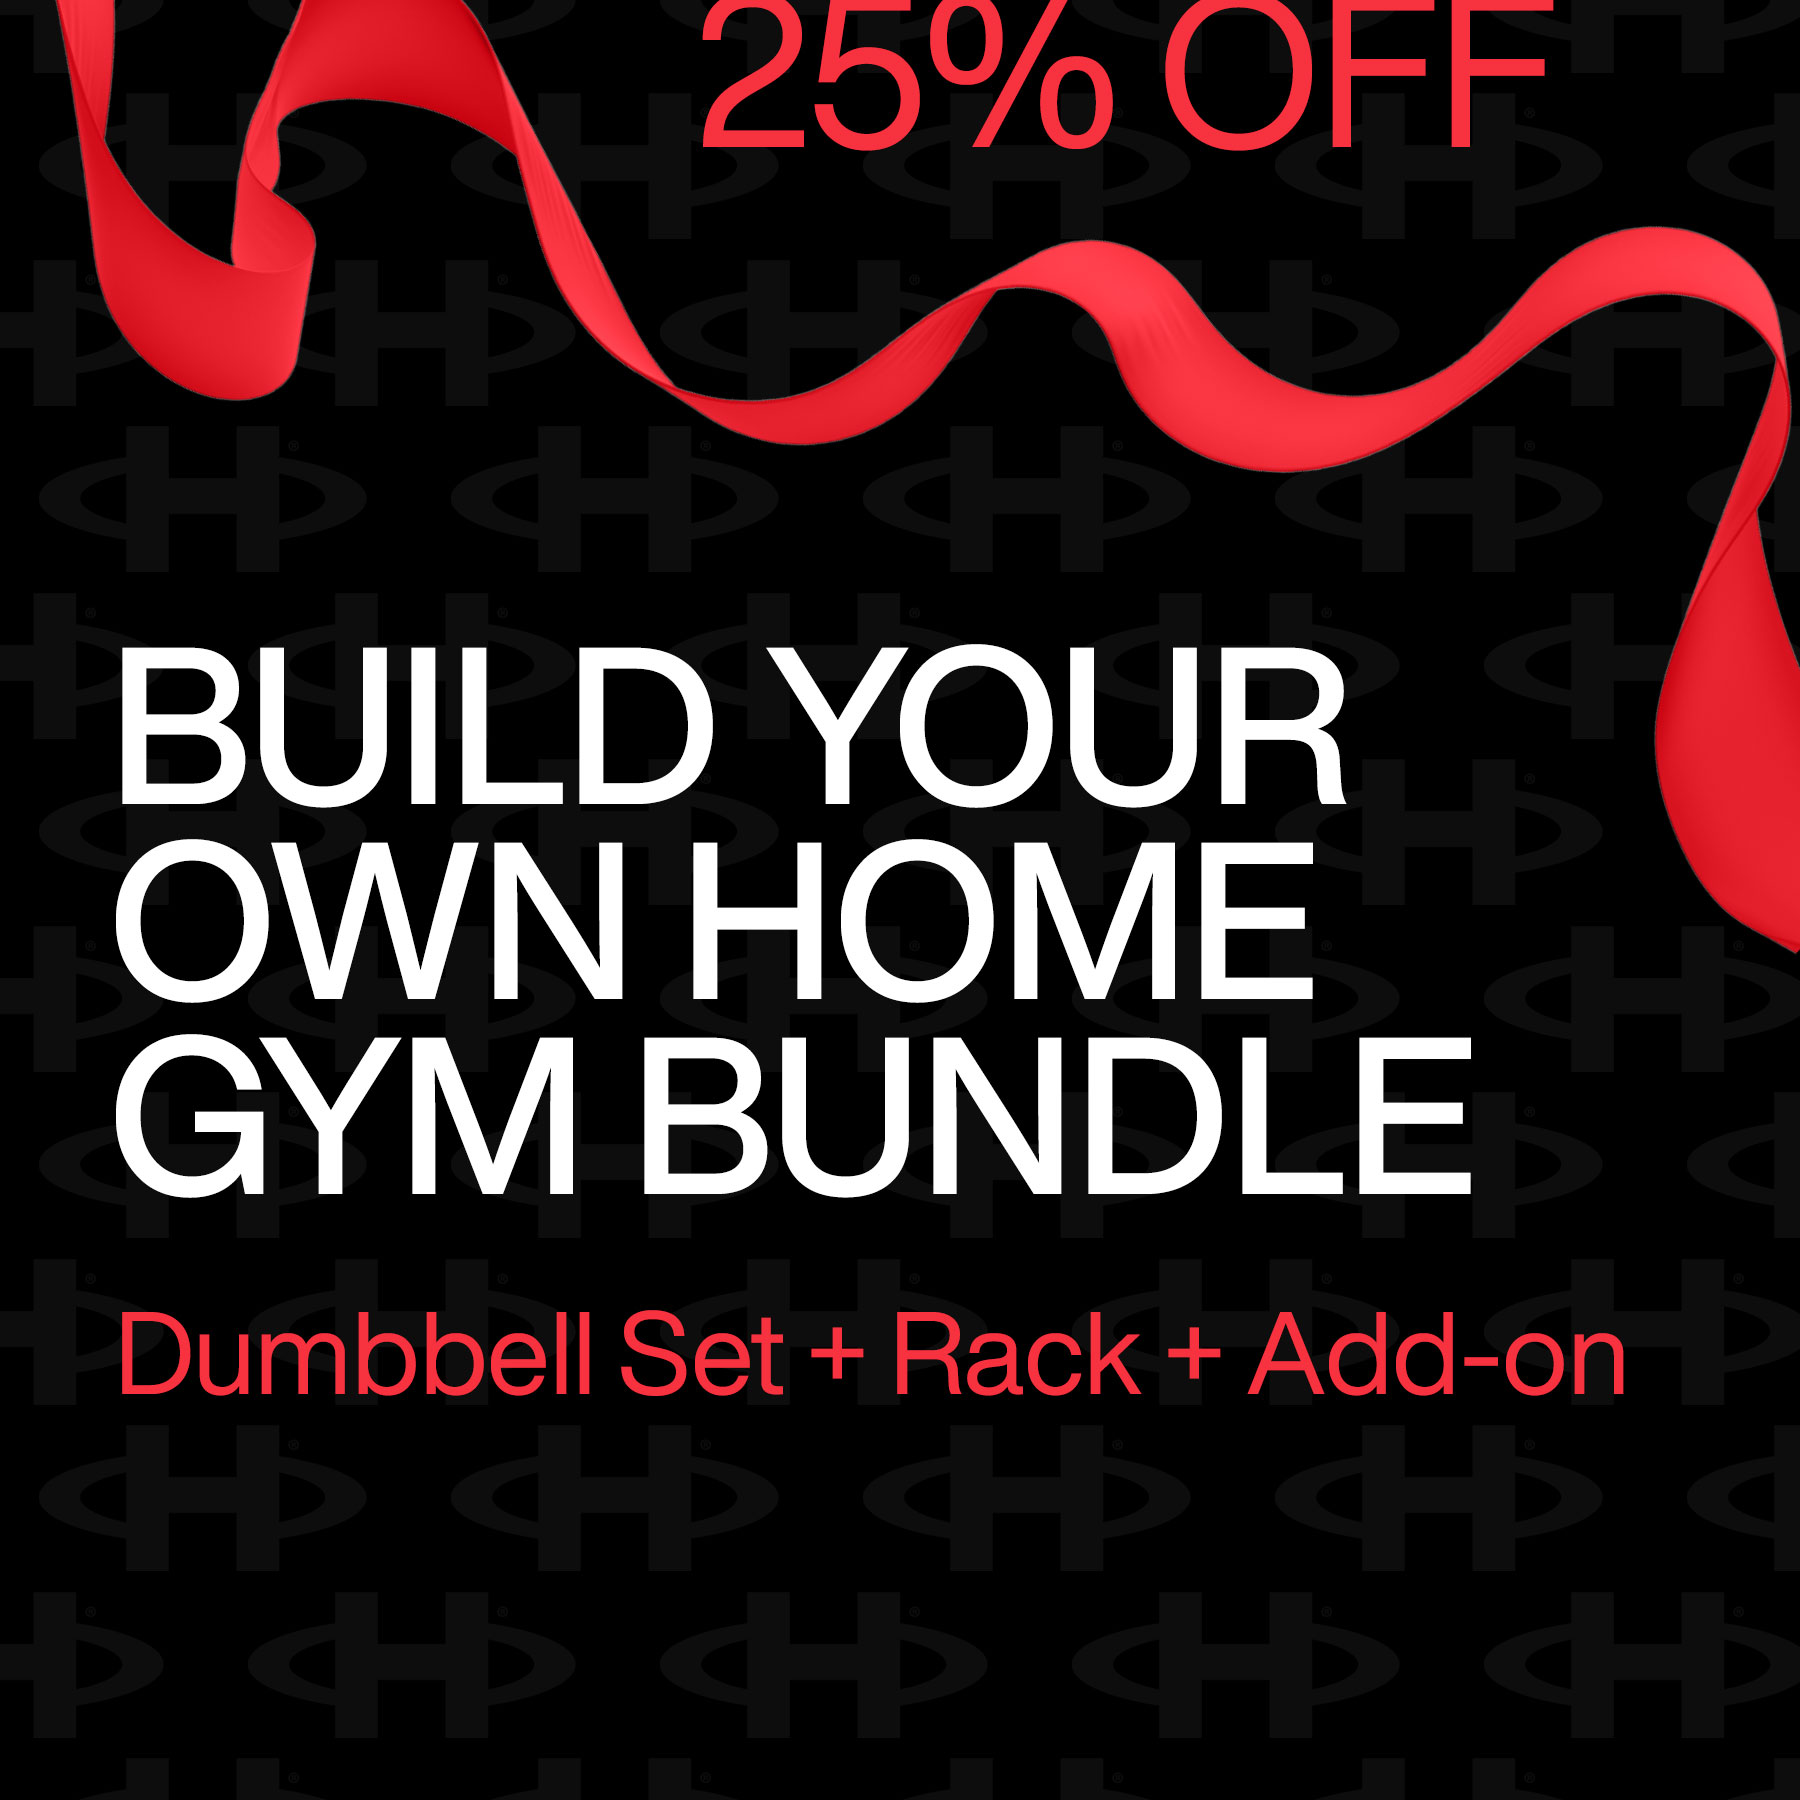 Home Gym Gifts - A Guide to This Season's Gifts for Home Gym Athletes -  Hampton Fitness